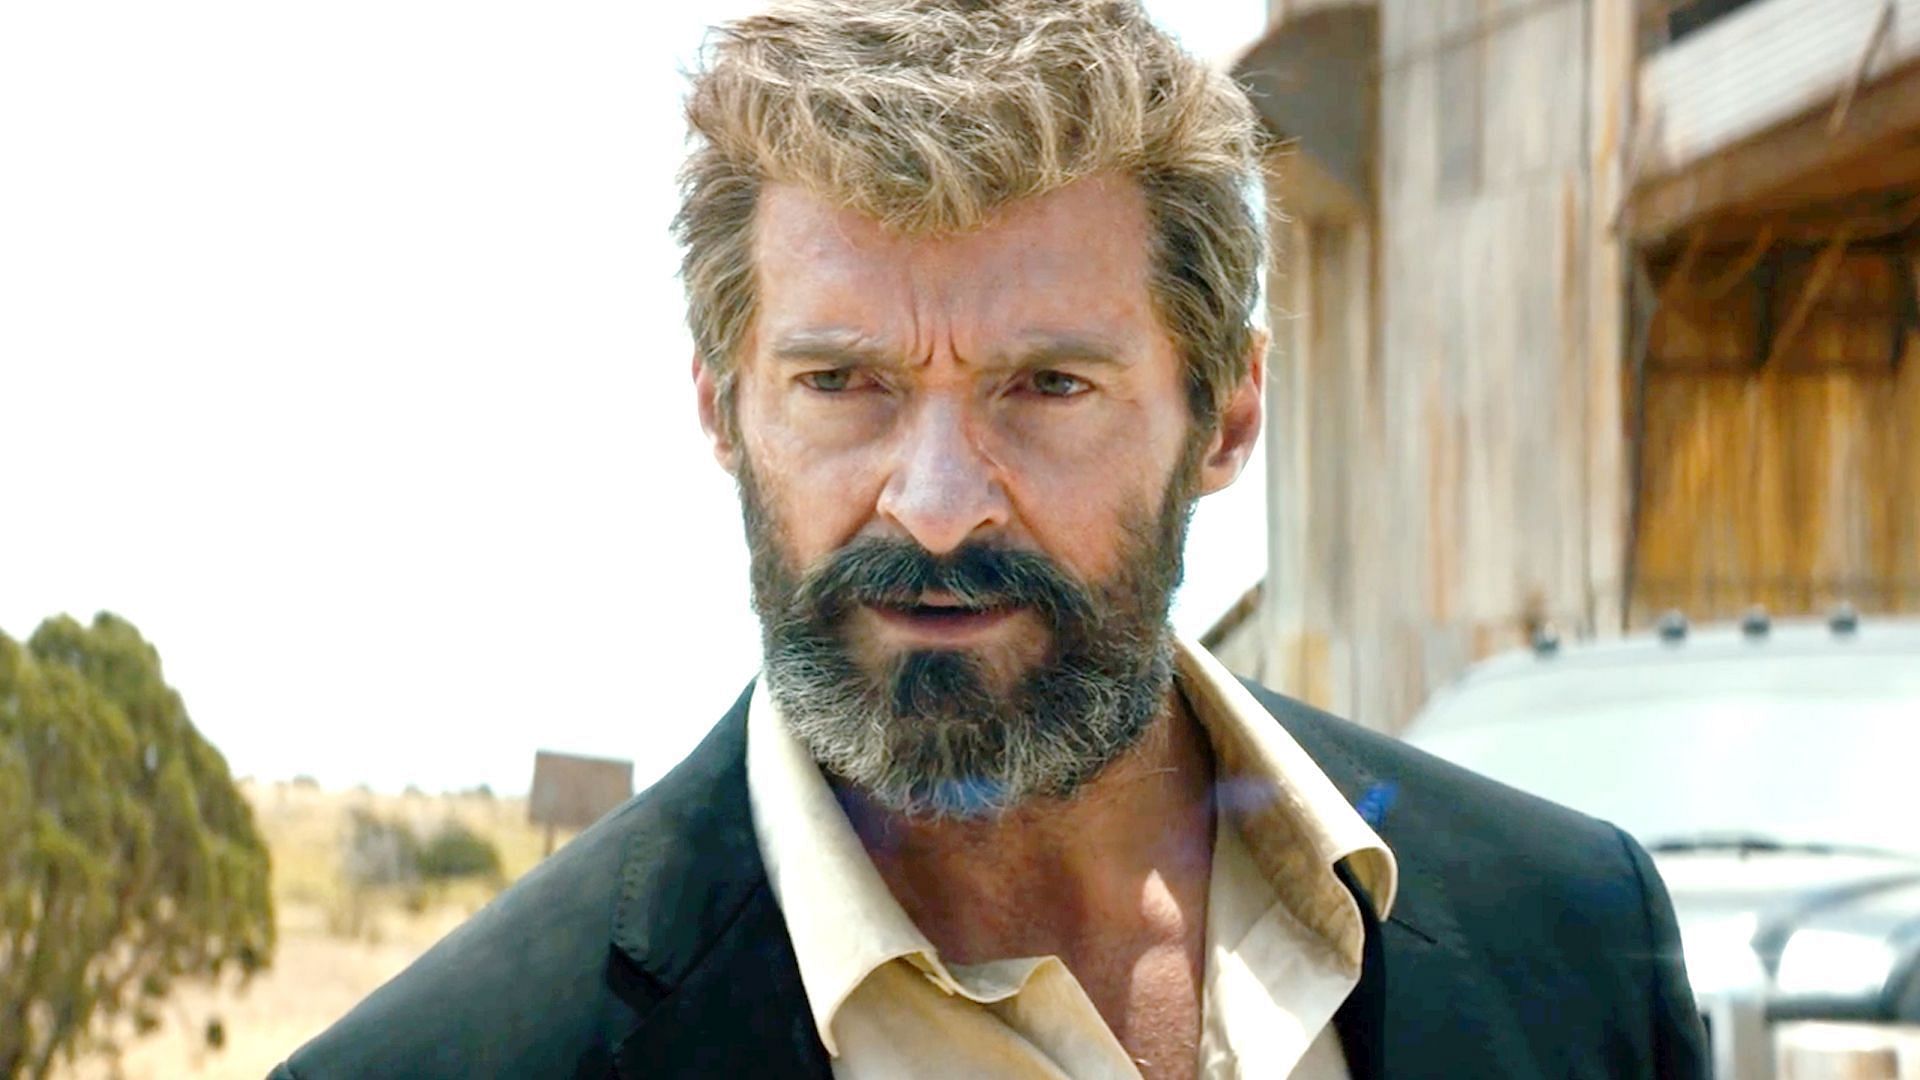 Hugh Jackman gets jacked and sports a new Wolverine beard ahead of filming for Deadpool 3 (Image via 20th Century Fox)